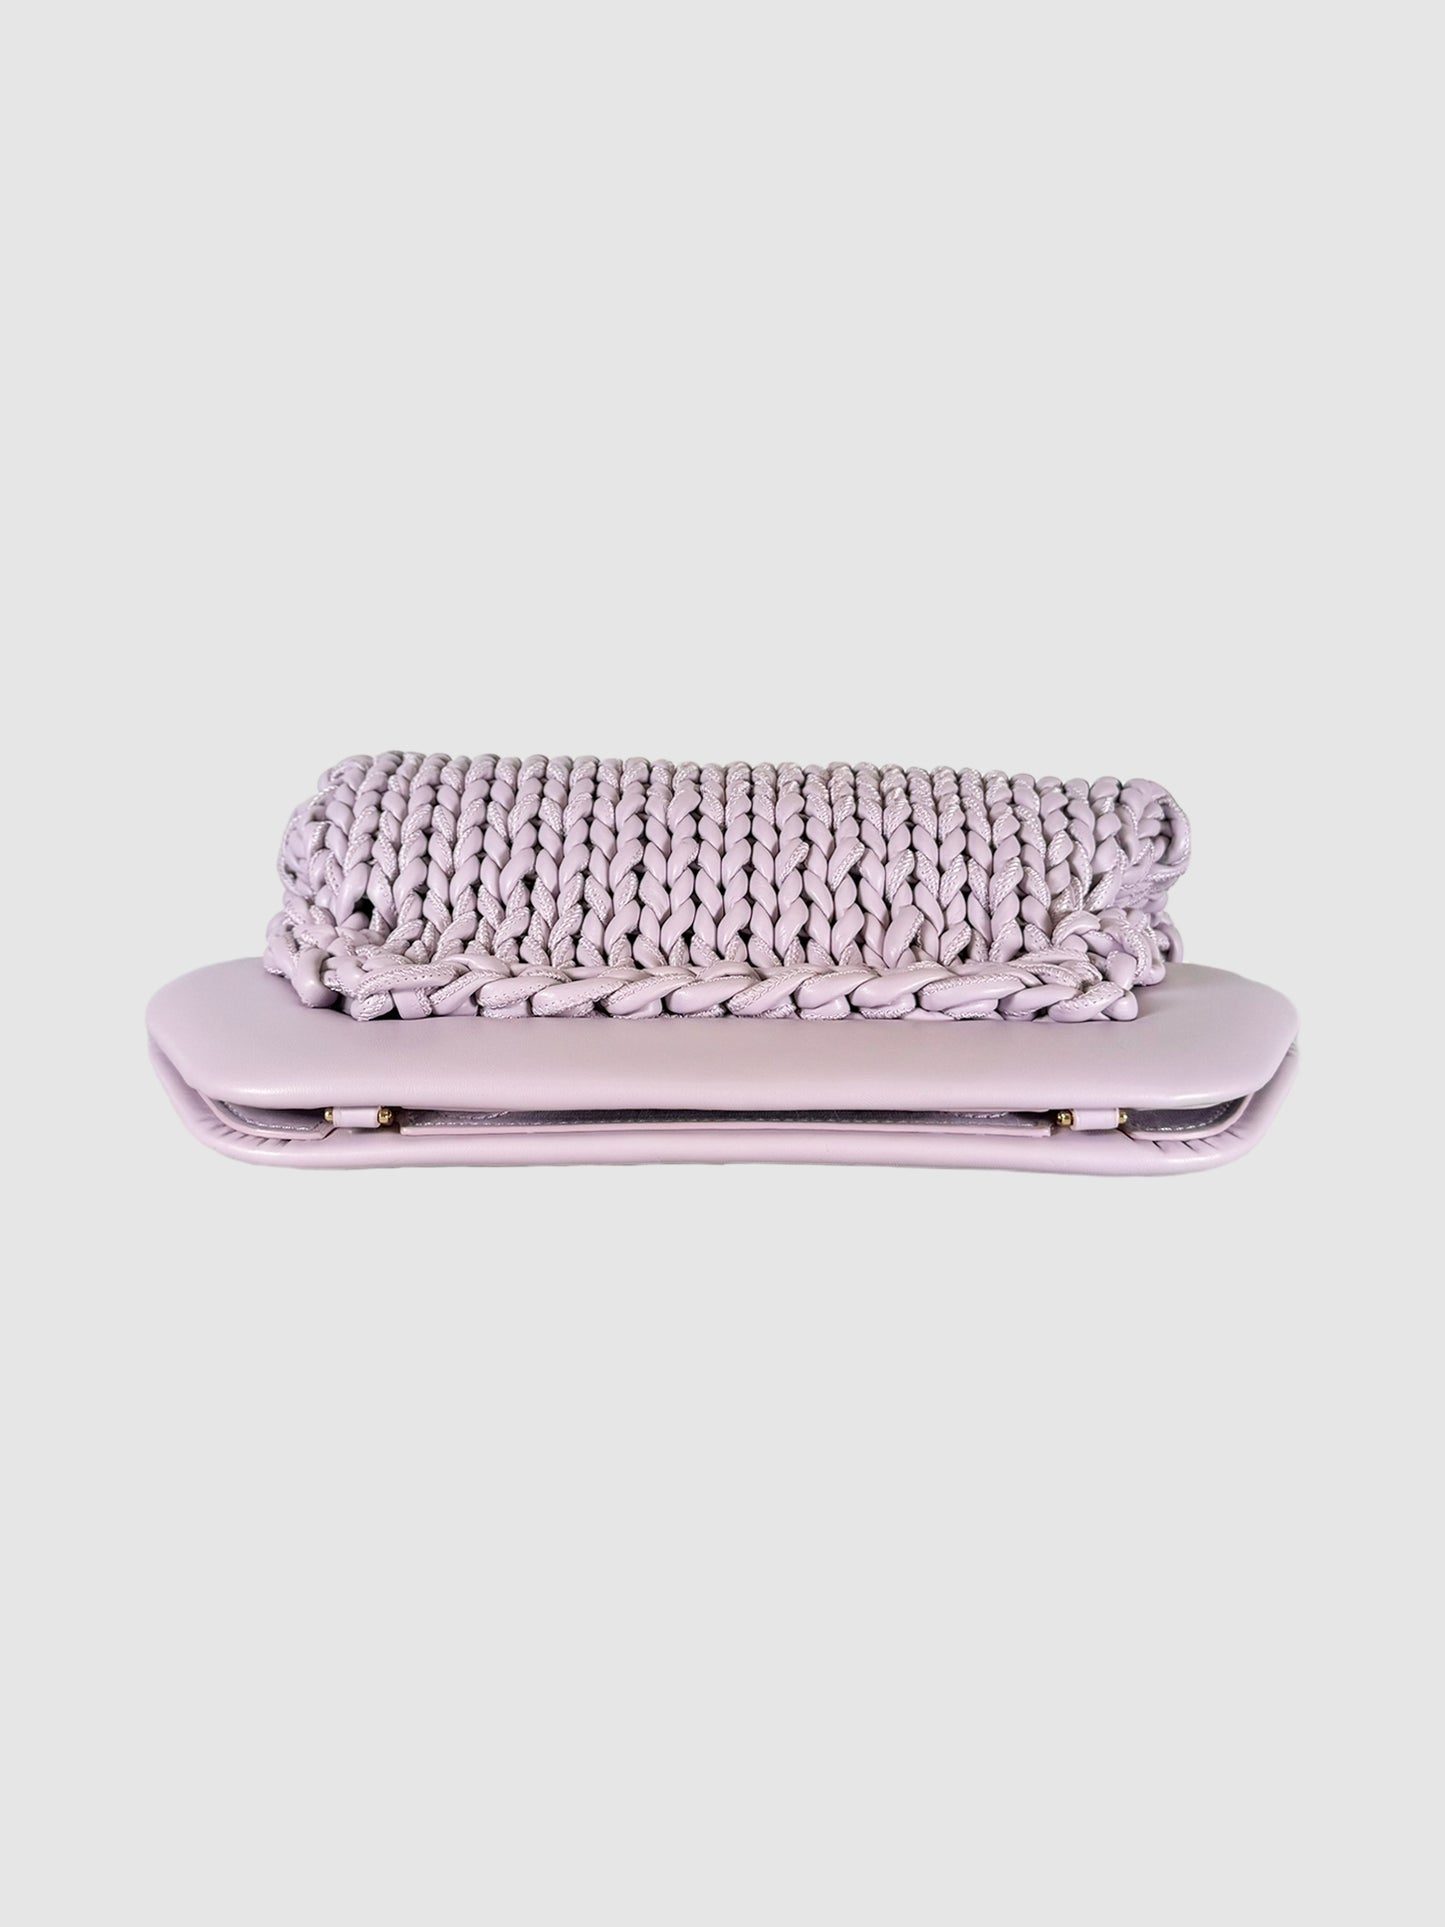 Large Bios Knitted Eco Leather Clutch Bag